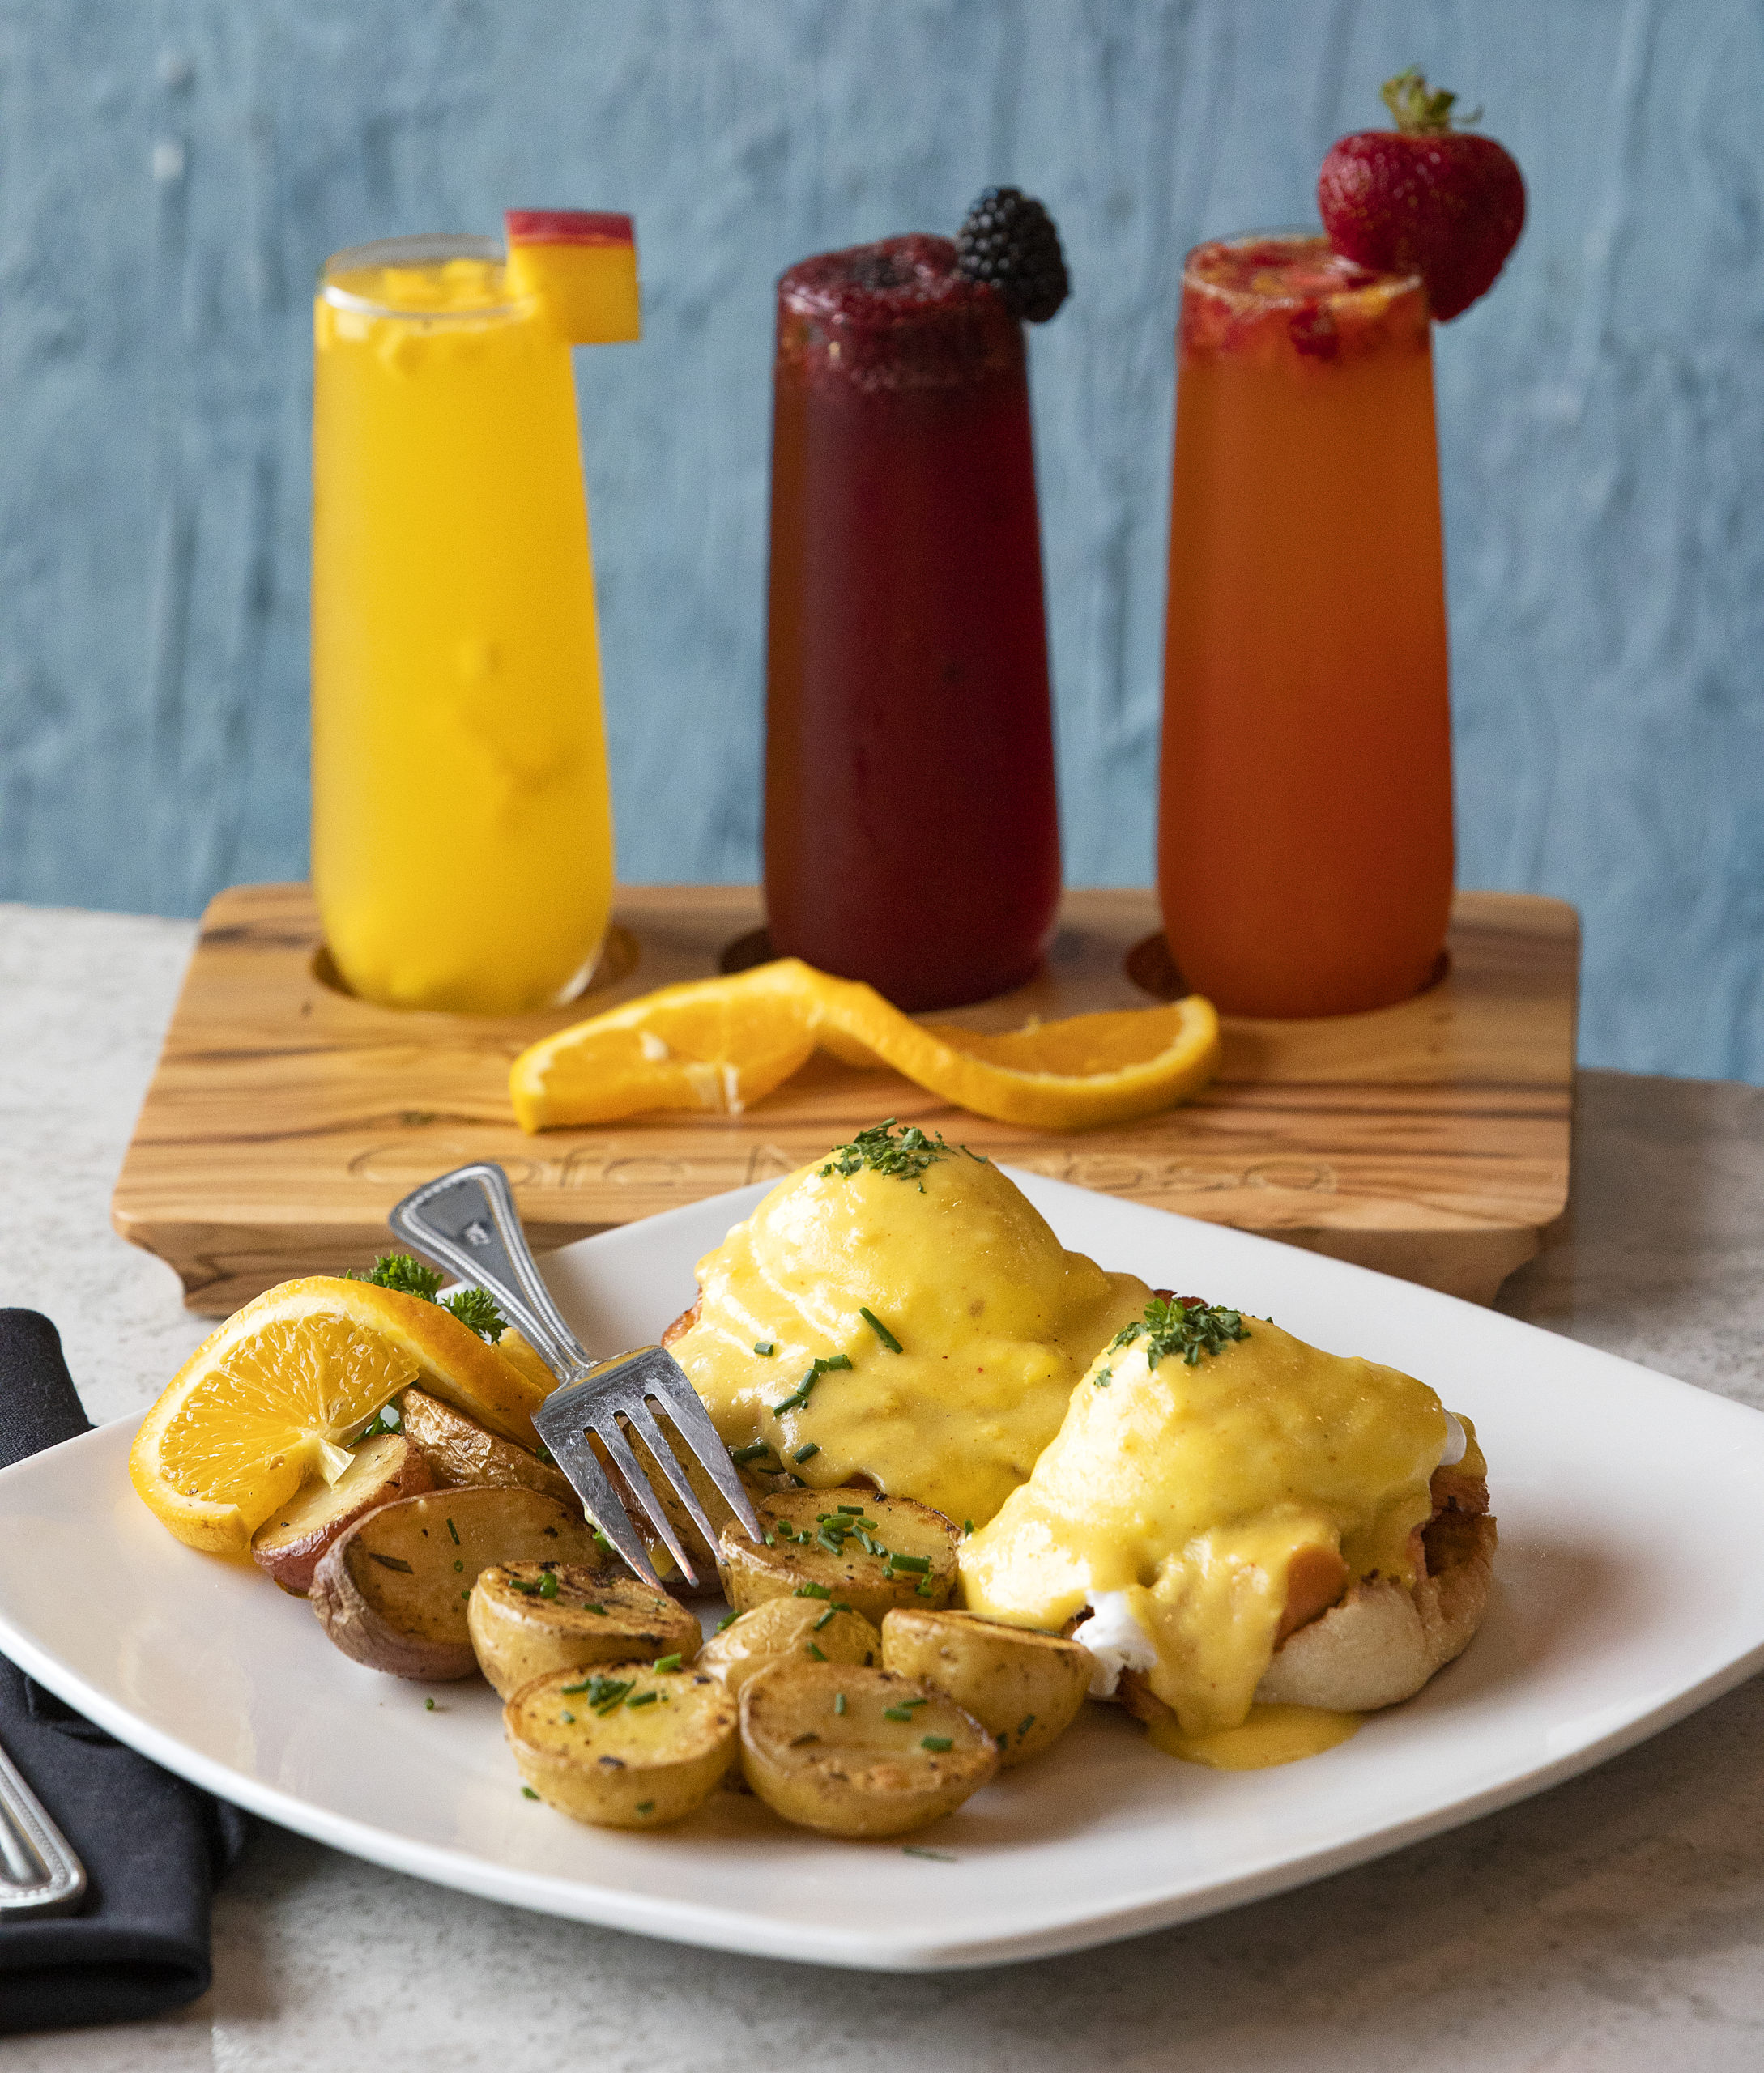 Smoked Salmon Benedict with champagne hollandaise, rosemary house potatoes on an English muffin with a mimosa sampler-from left, mango, blackberry and strawberry-from Cafe Mimosa in Rohnert Park. (photo by John Burgess/The Press Democrat).